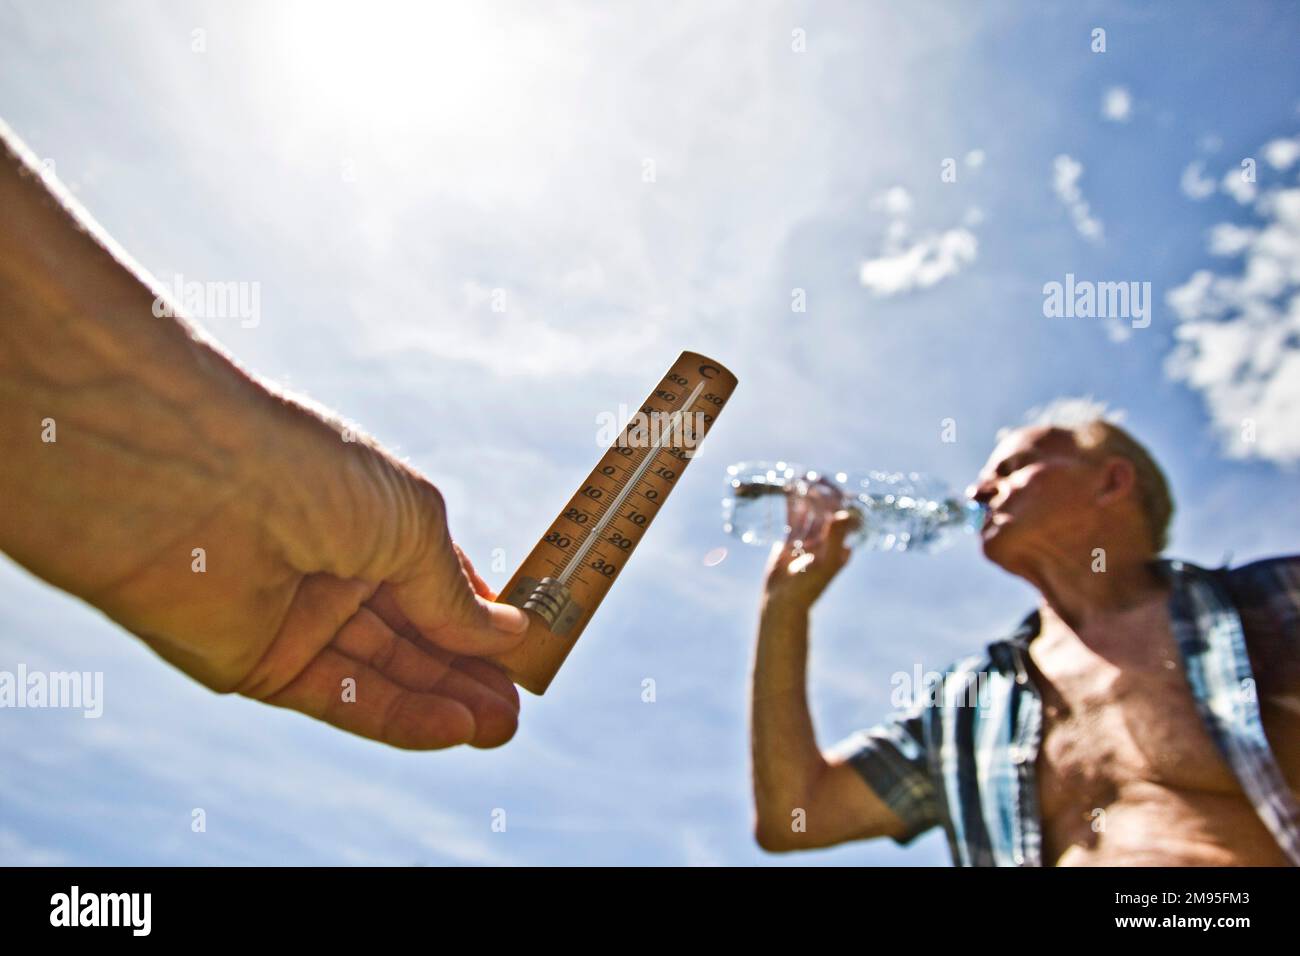 Senior citizens and heat wave: staying hydrated. Intense heat: thermometer and old man under the sun drinking water. Illustration, elderly people and Stock Photo